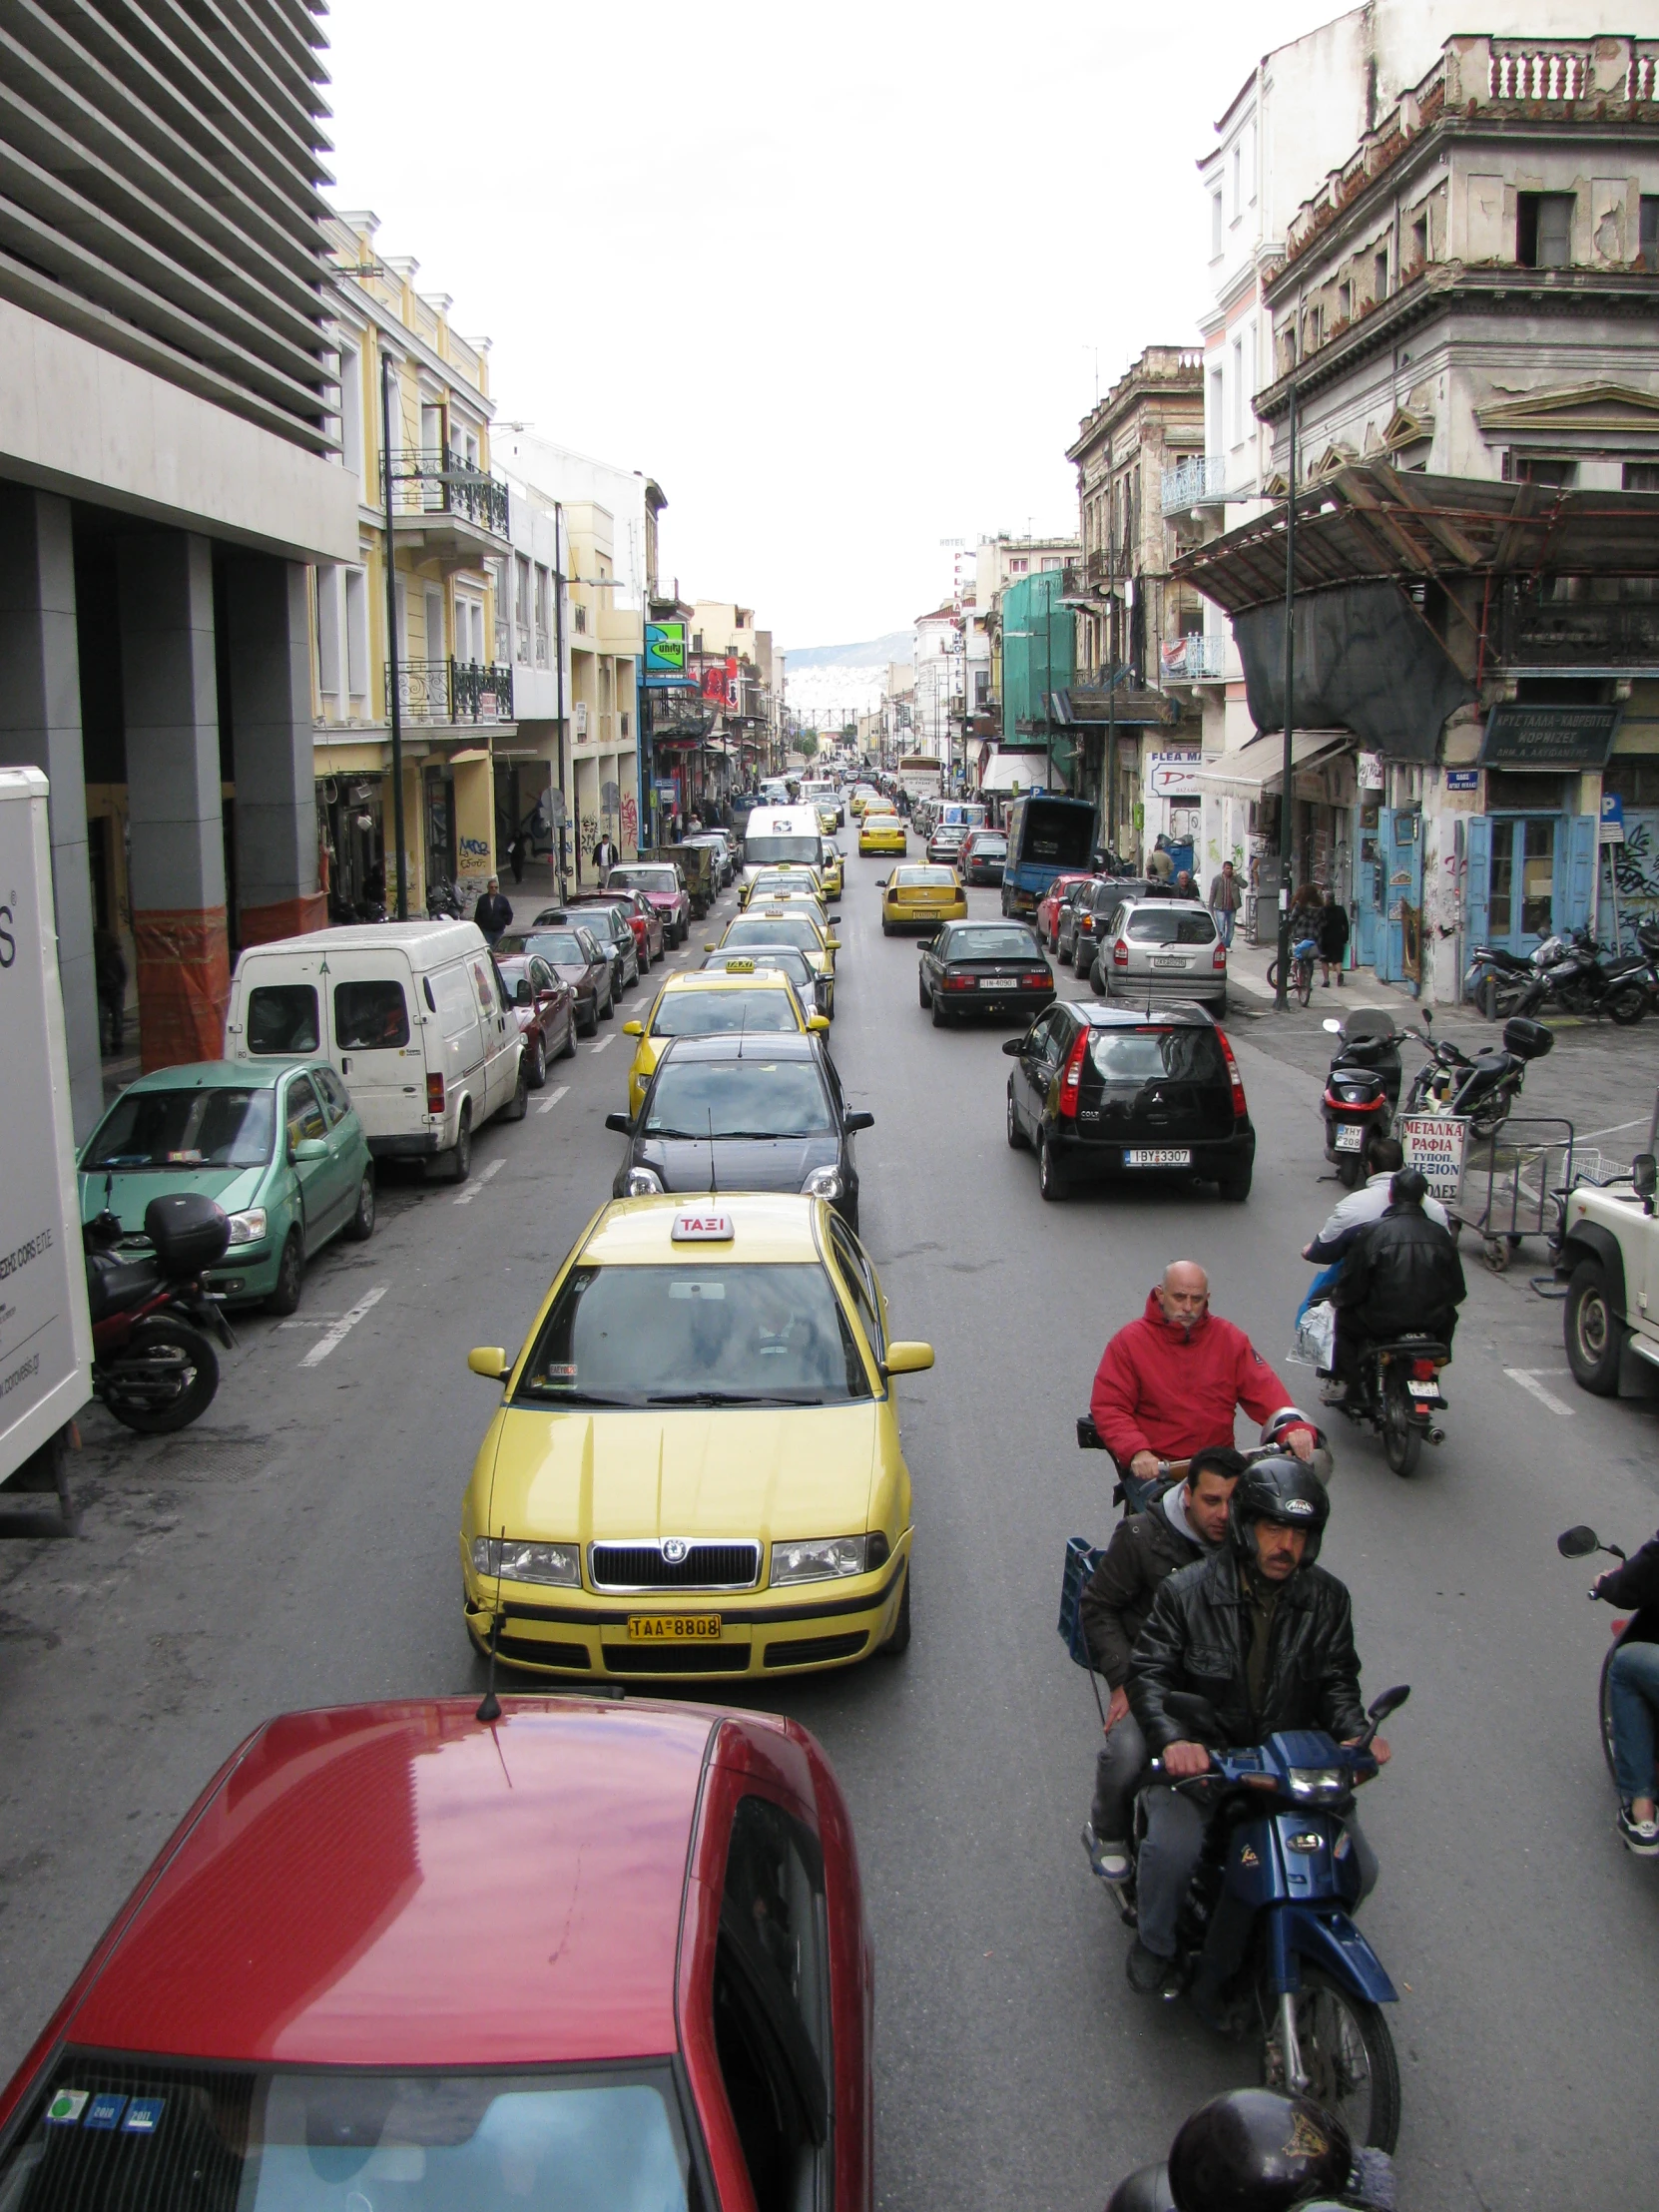 a number of people on motorcycles in a street